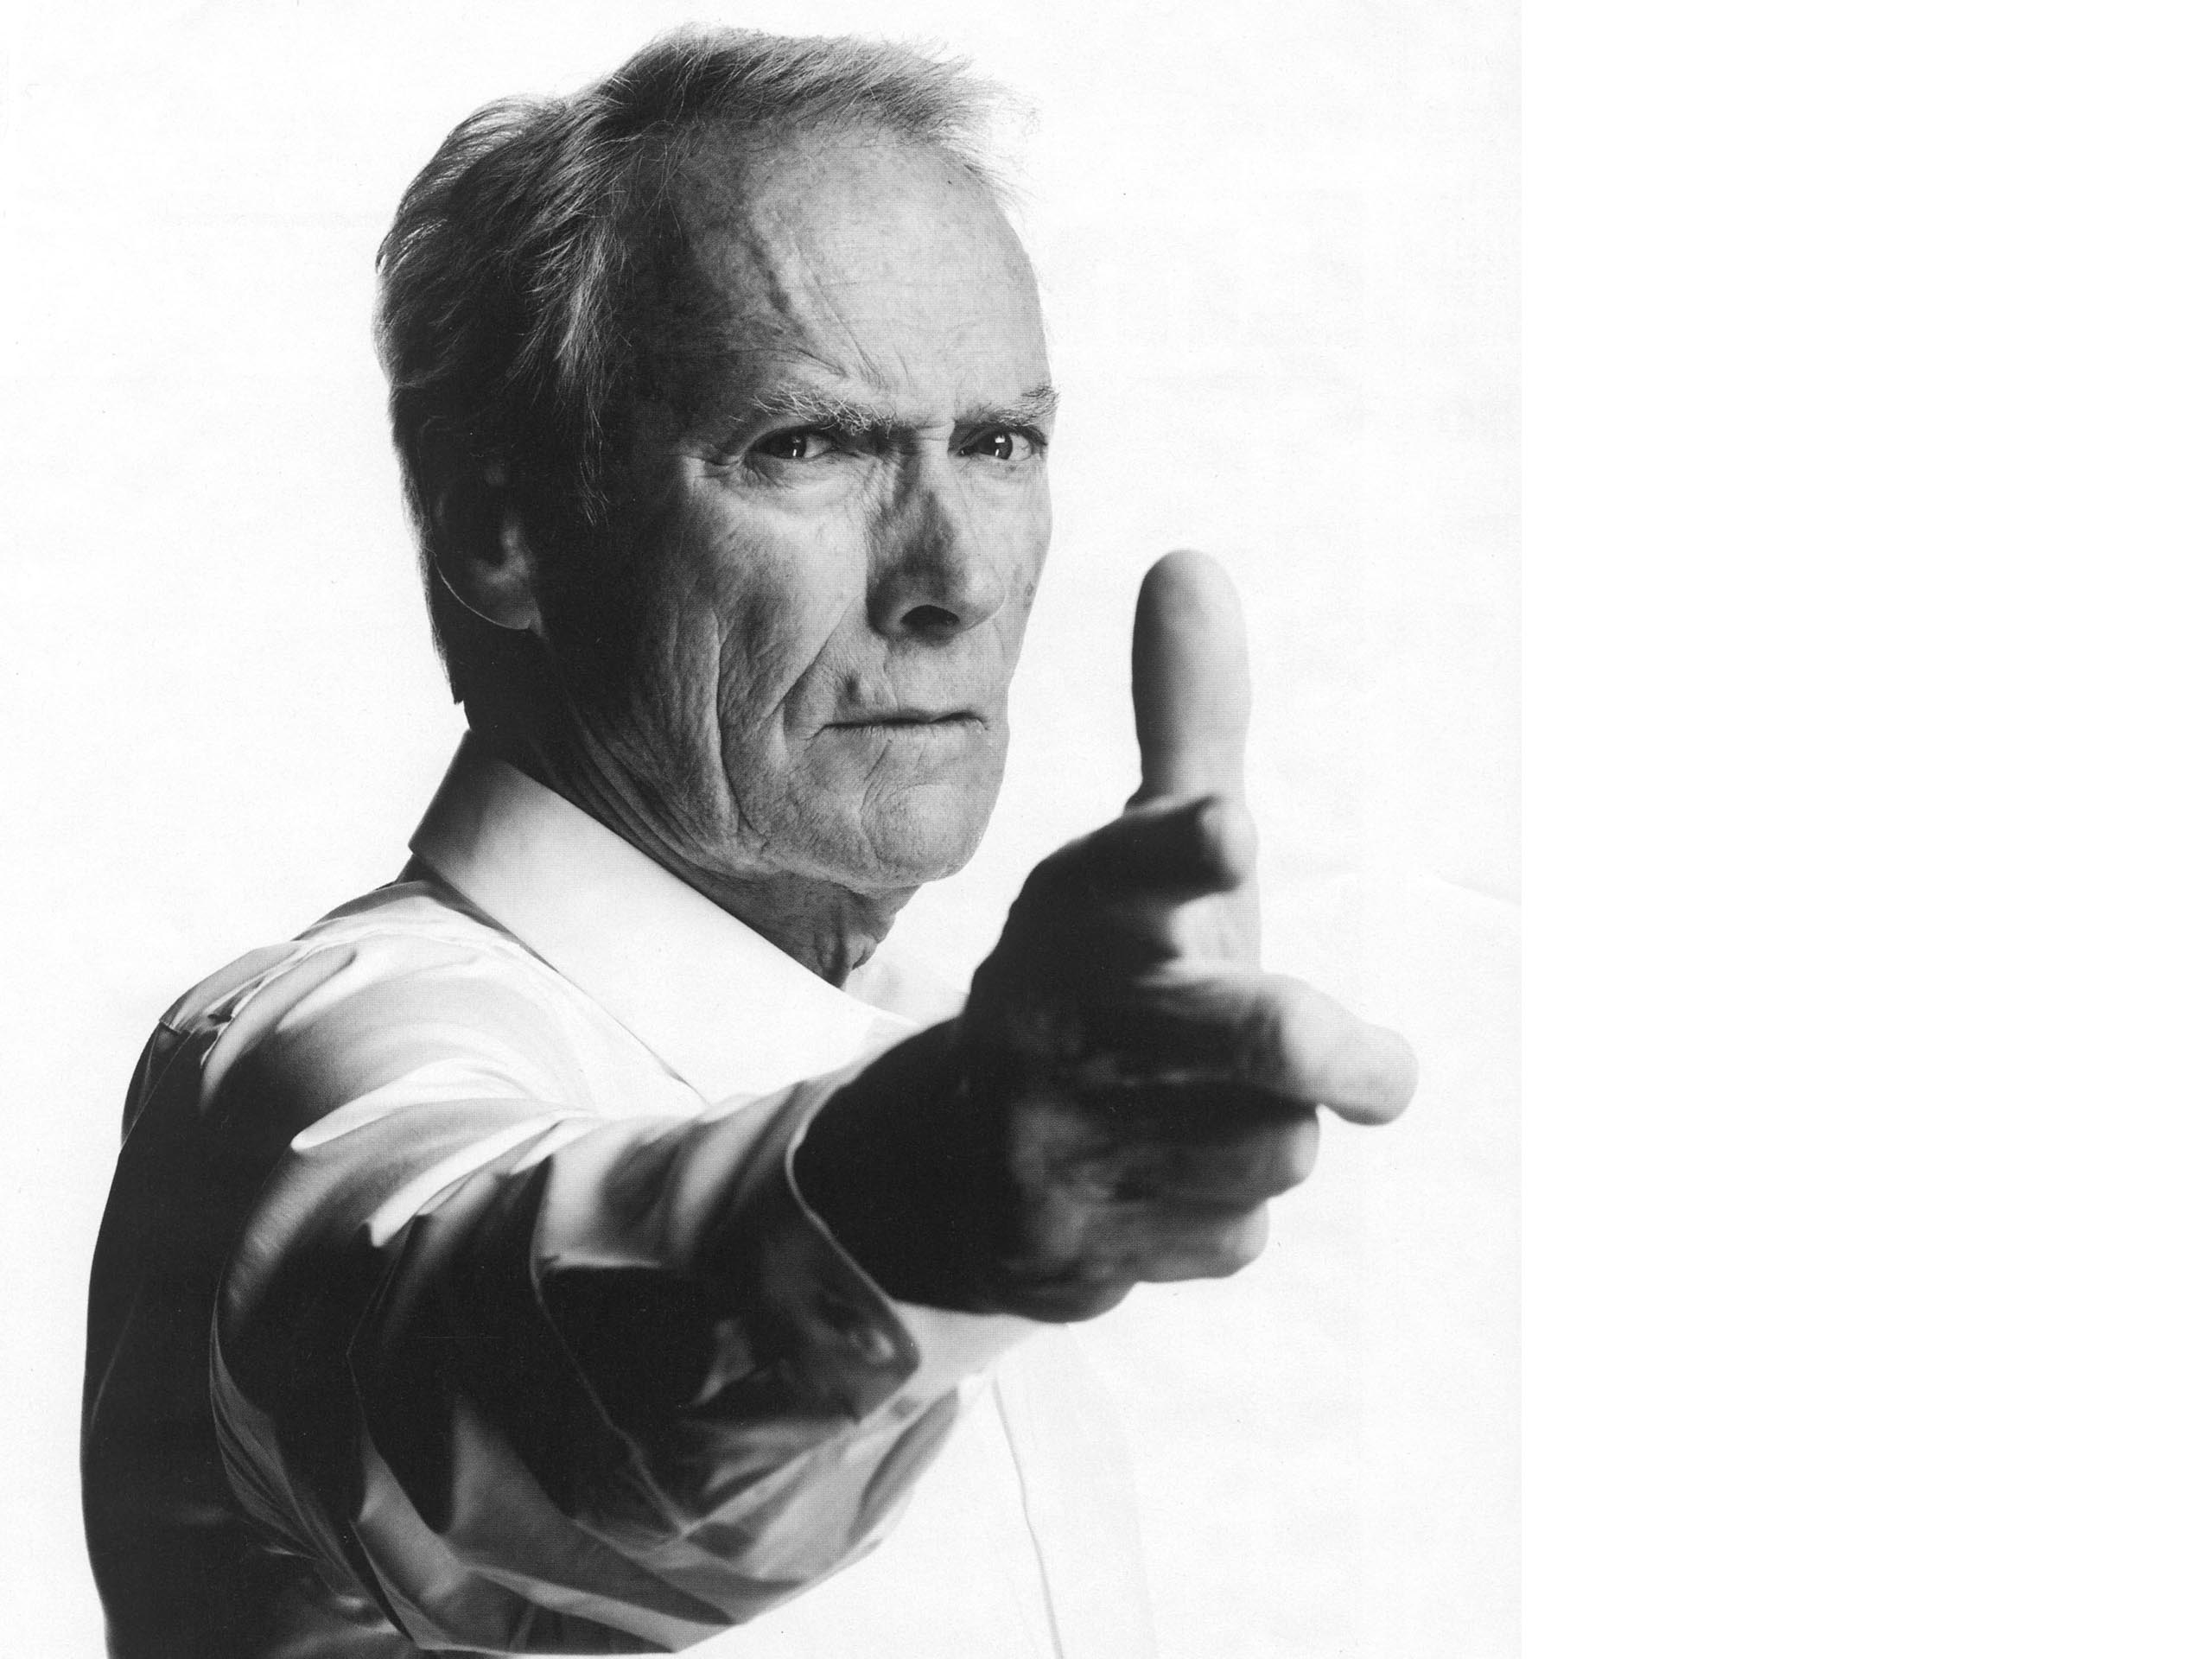 A very touching & heartfelt message from Clint Eastwood. My Twilight Years ~ Clint Eastwood As I enjoy my twilight years, I am often struck by the ...